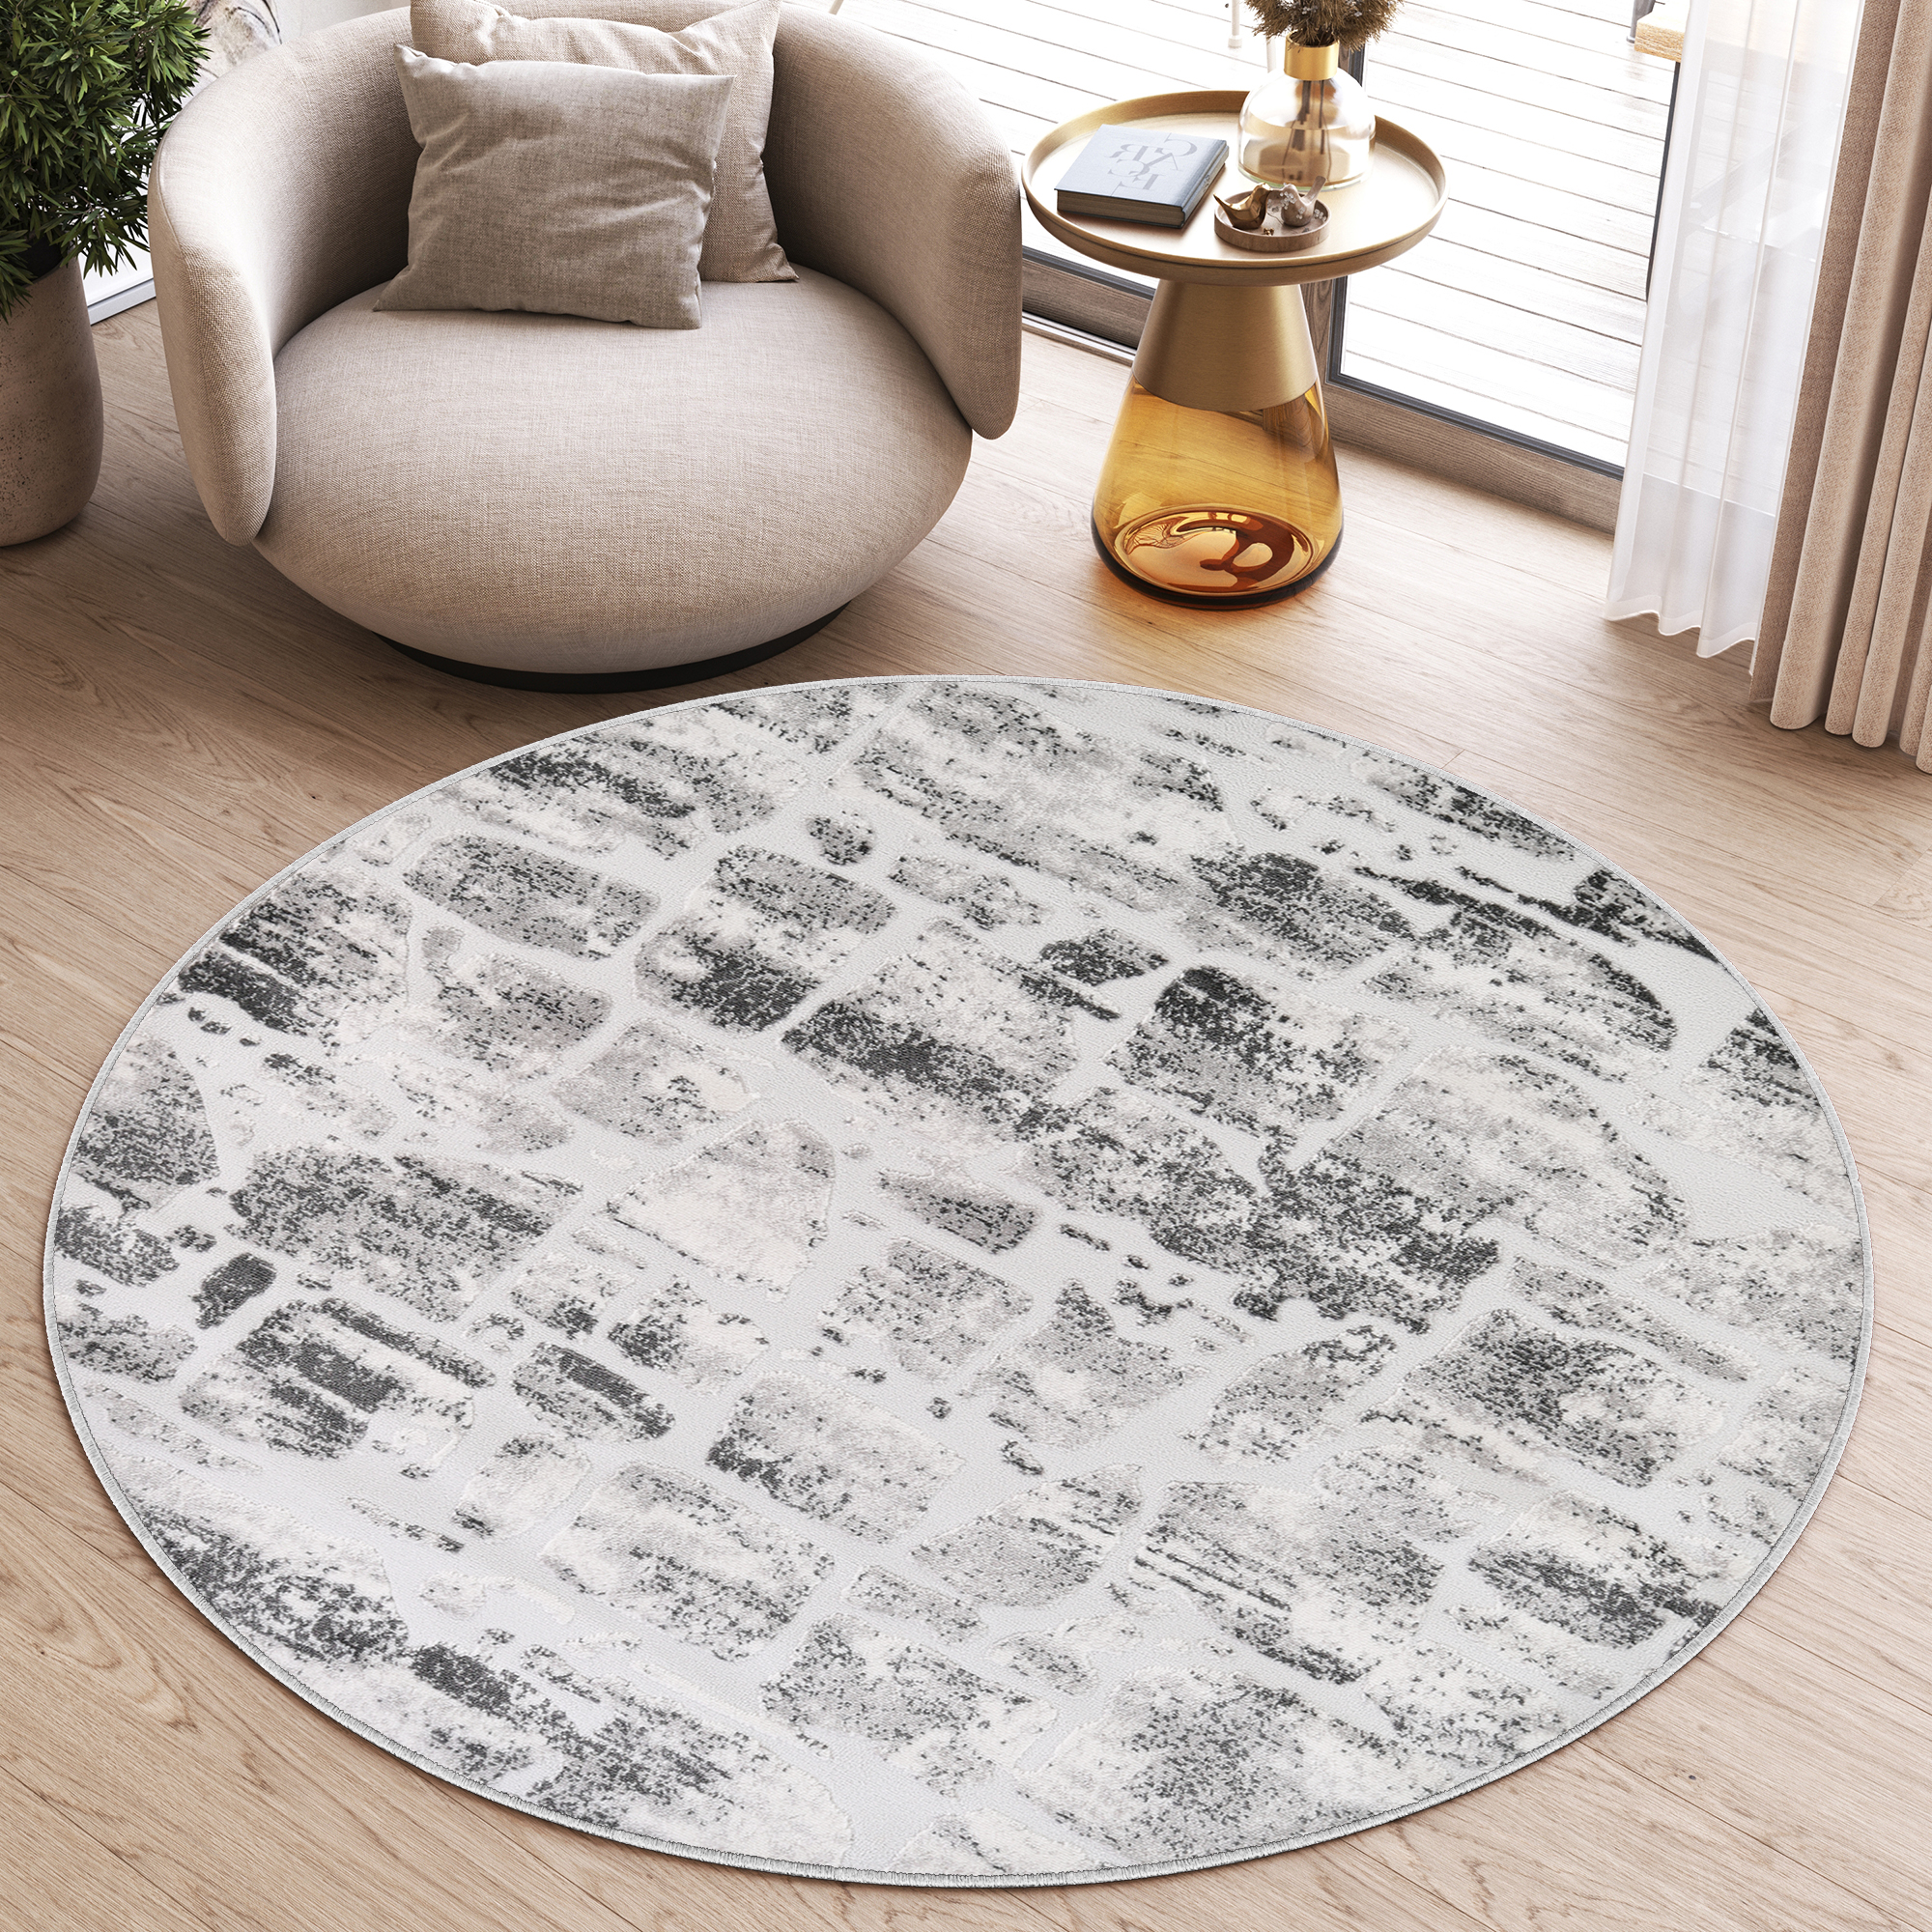 Area Rug Sky Round Grey Beige Abstract Flecked